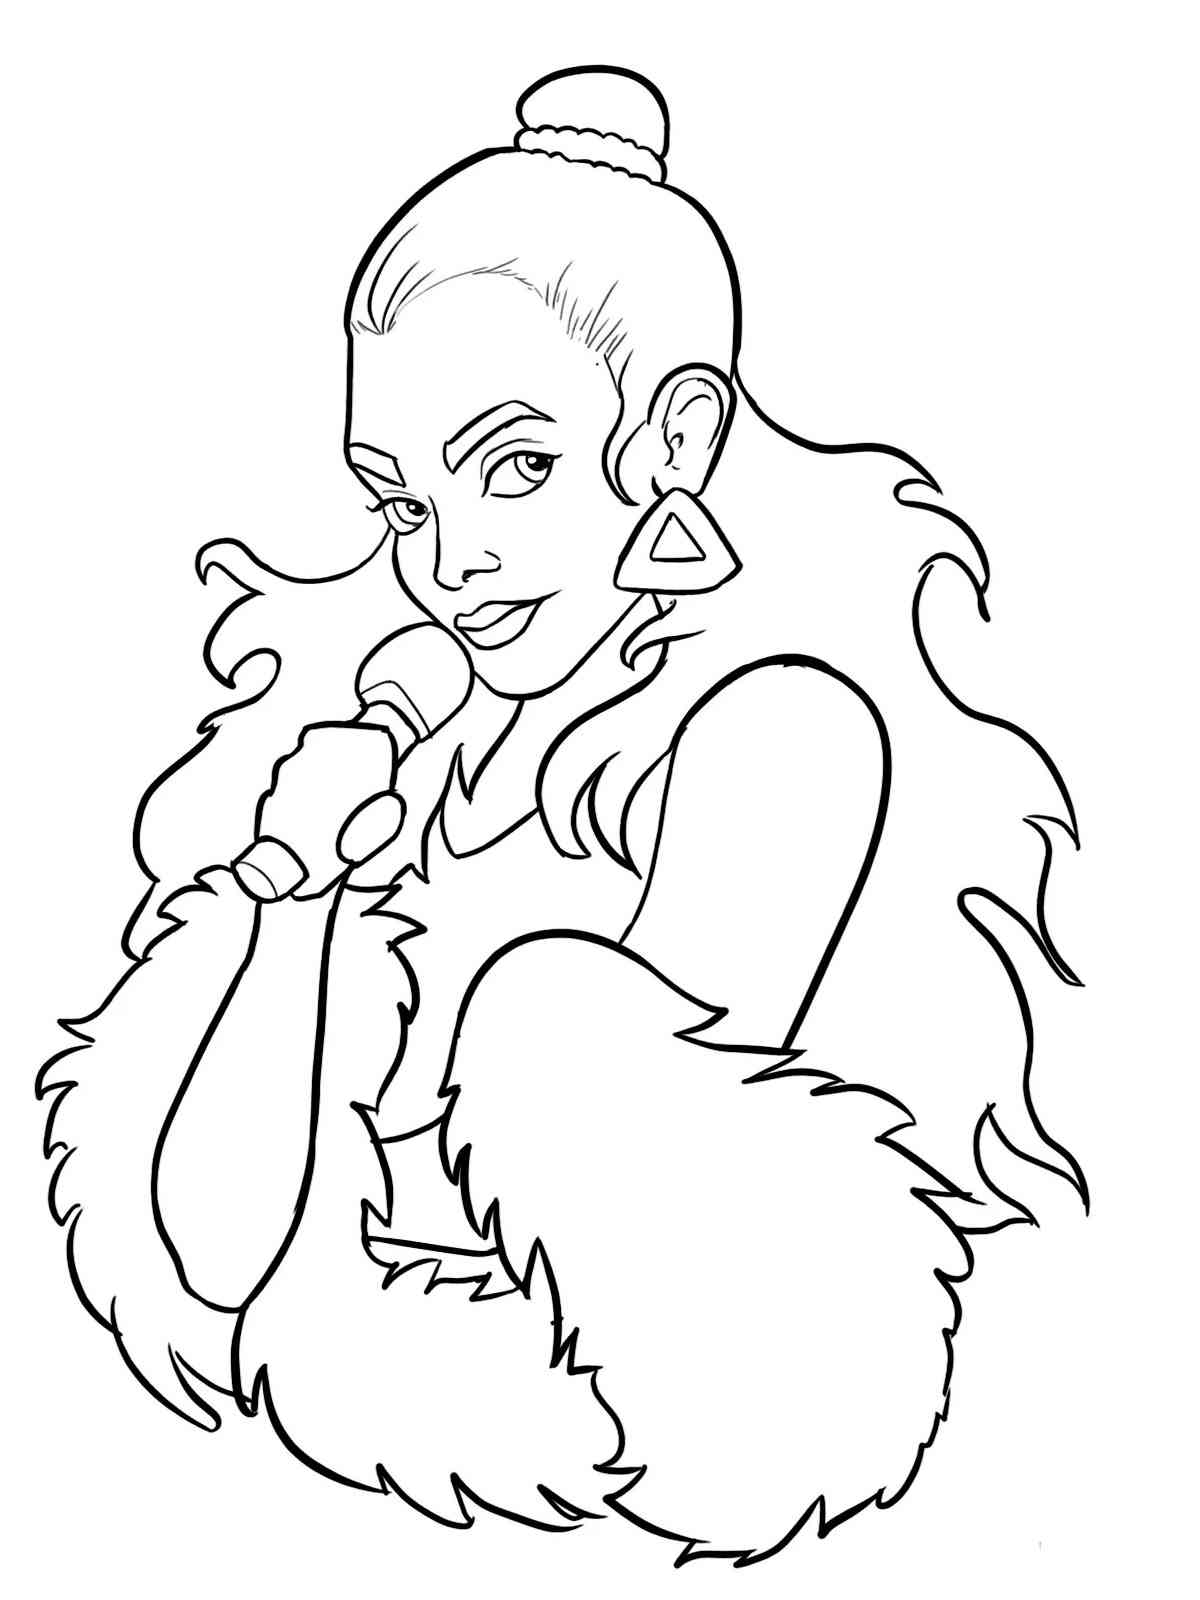 Cute Beyonce coloring page